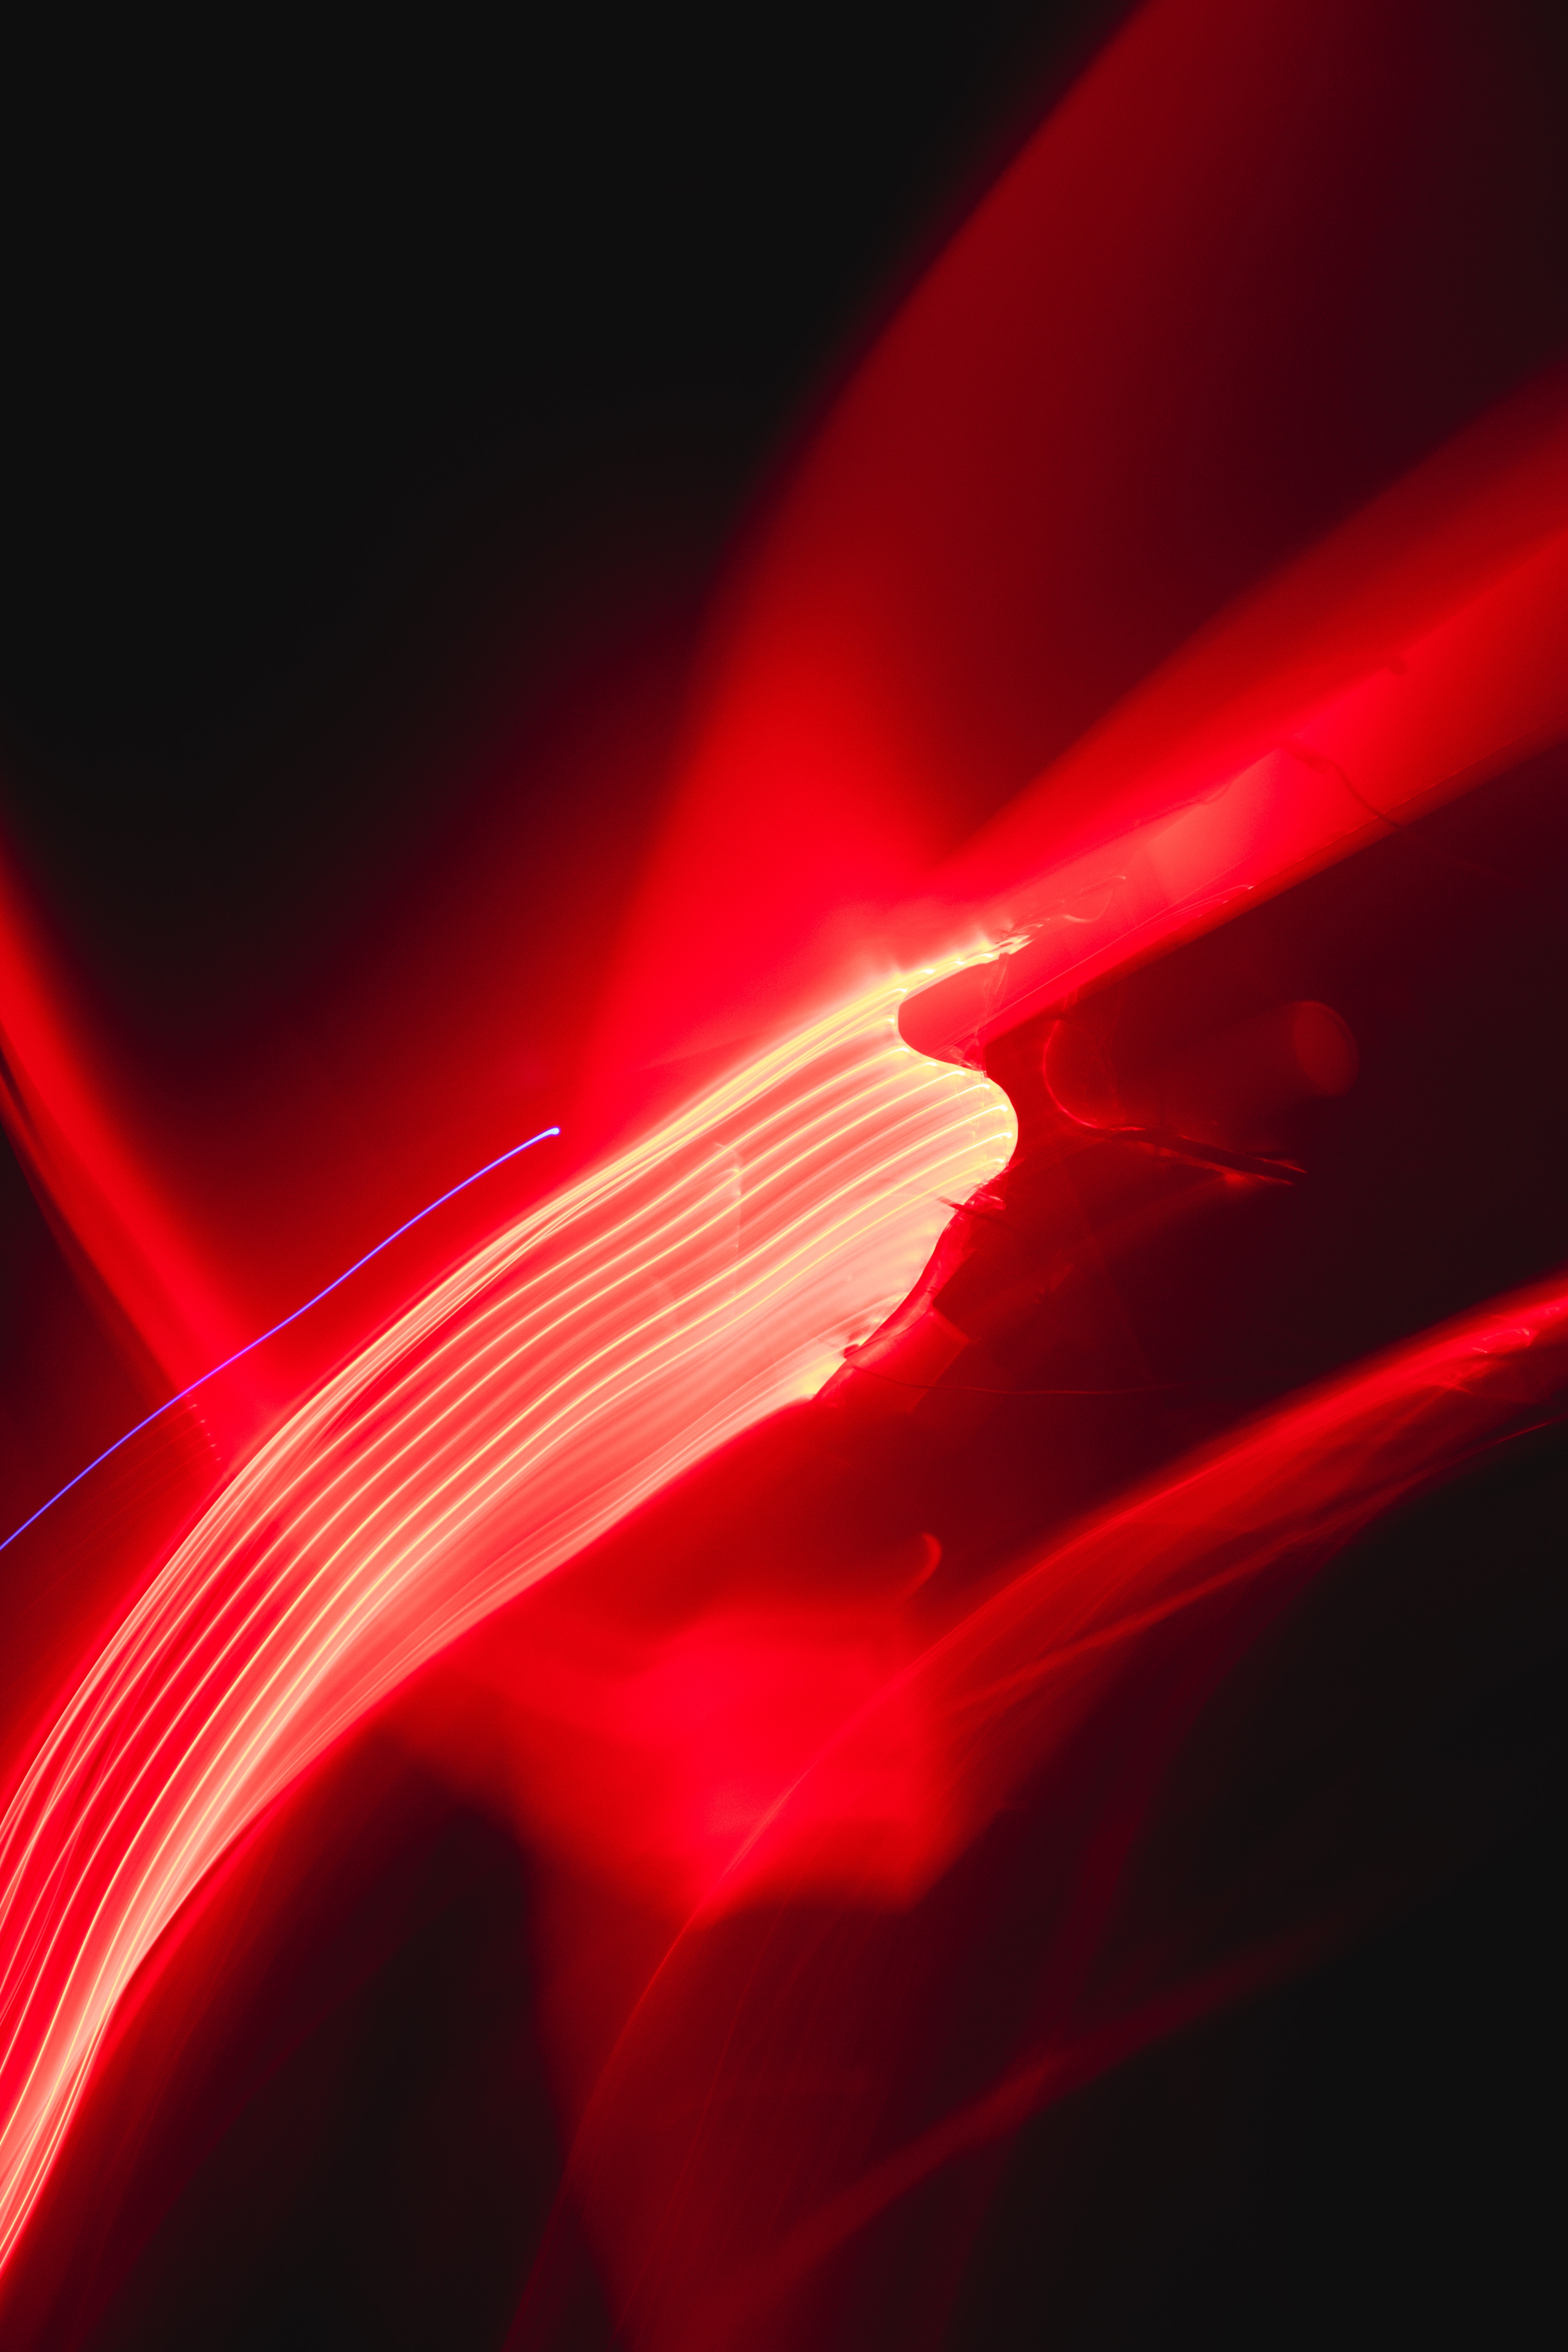 Wallpaper Red and White Light Streaks, Background - Download Free Image